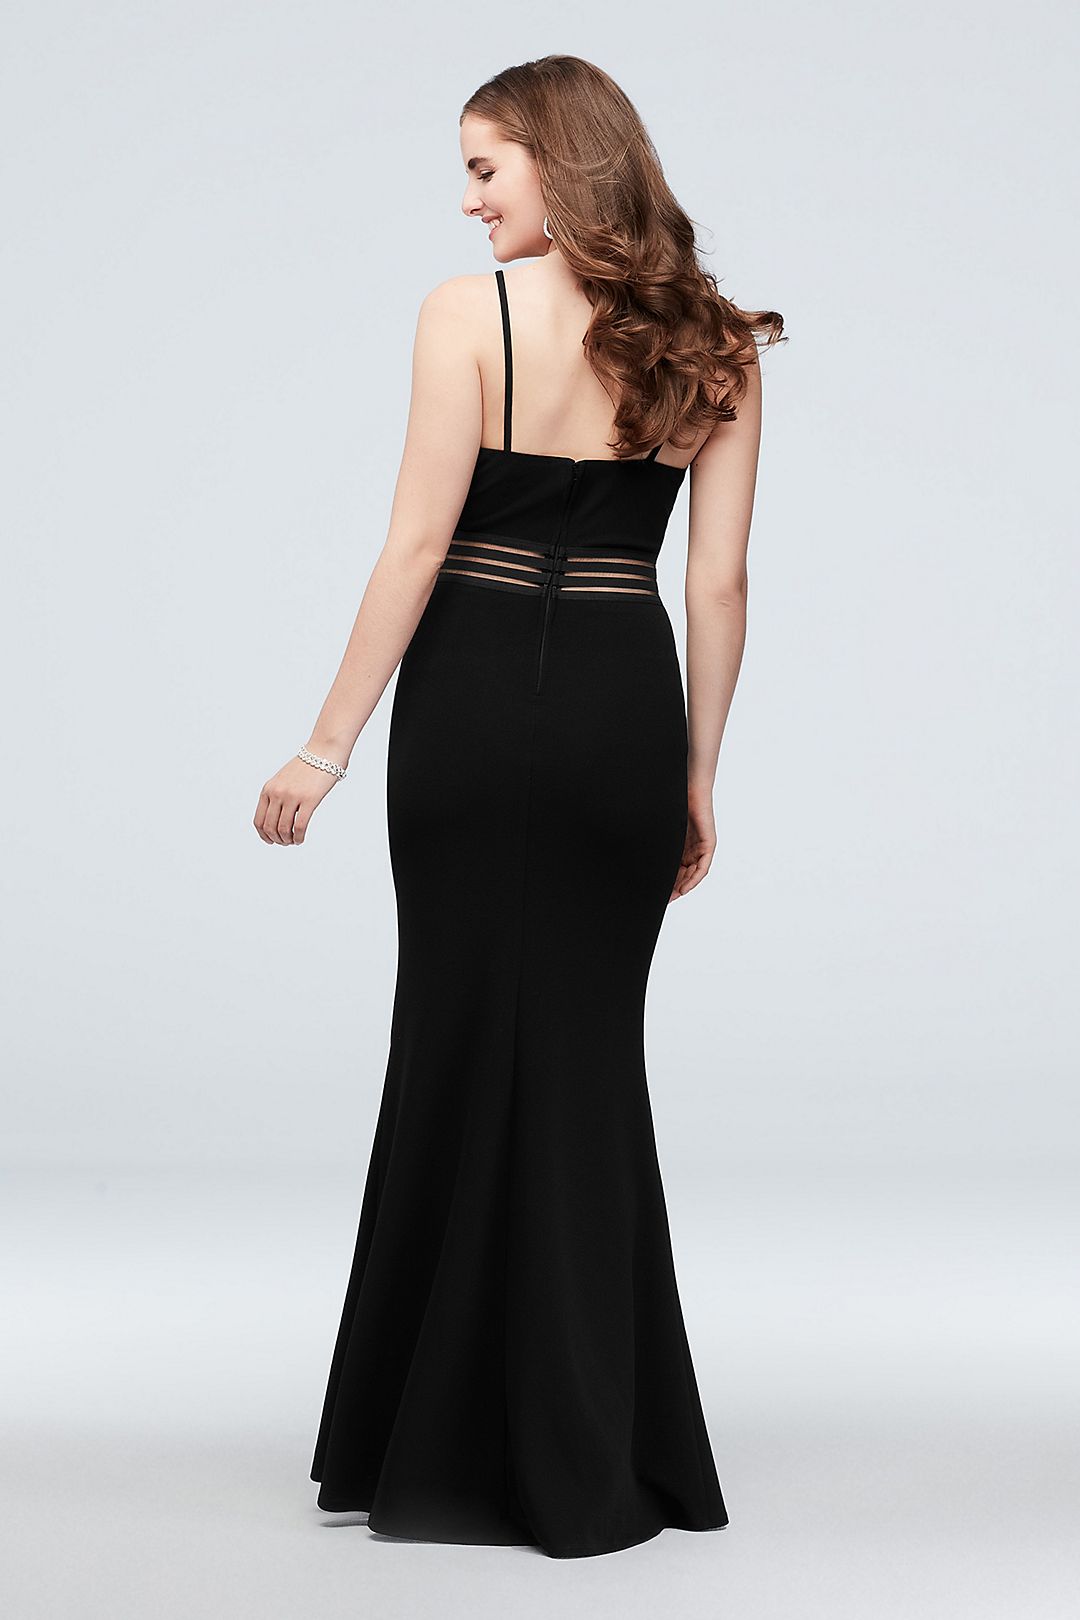 Illusion High-Neck Mermaid Gown with Banded Waist Image 4